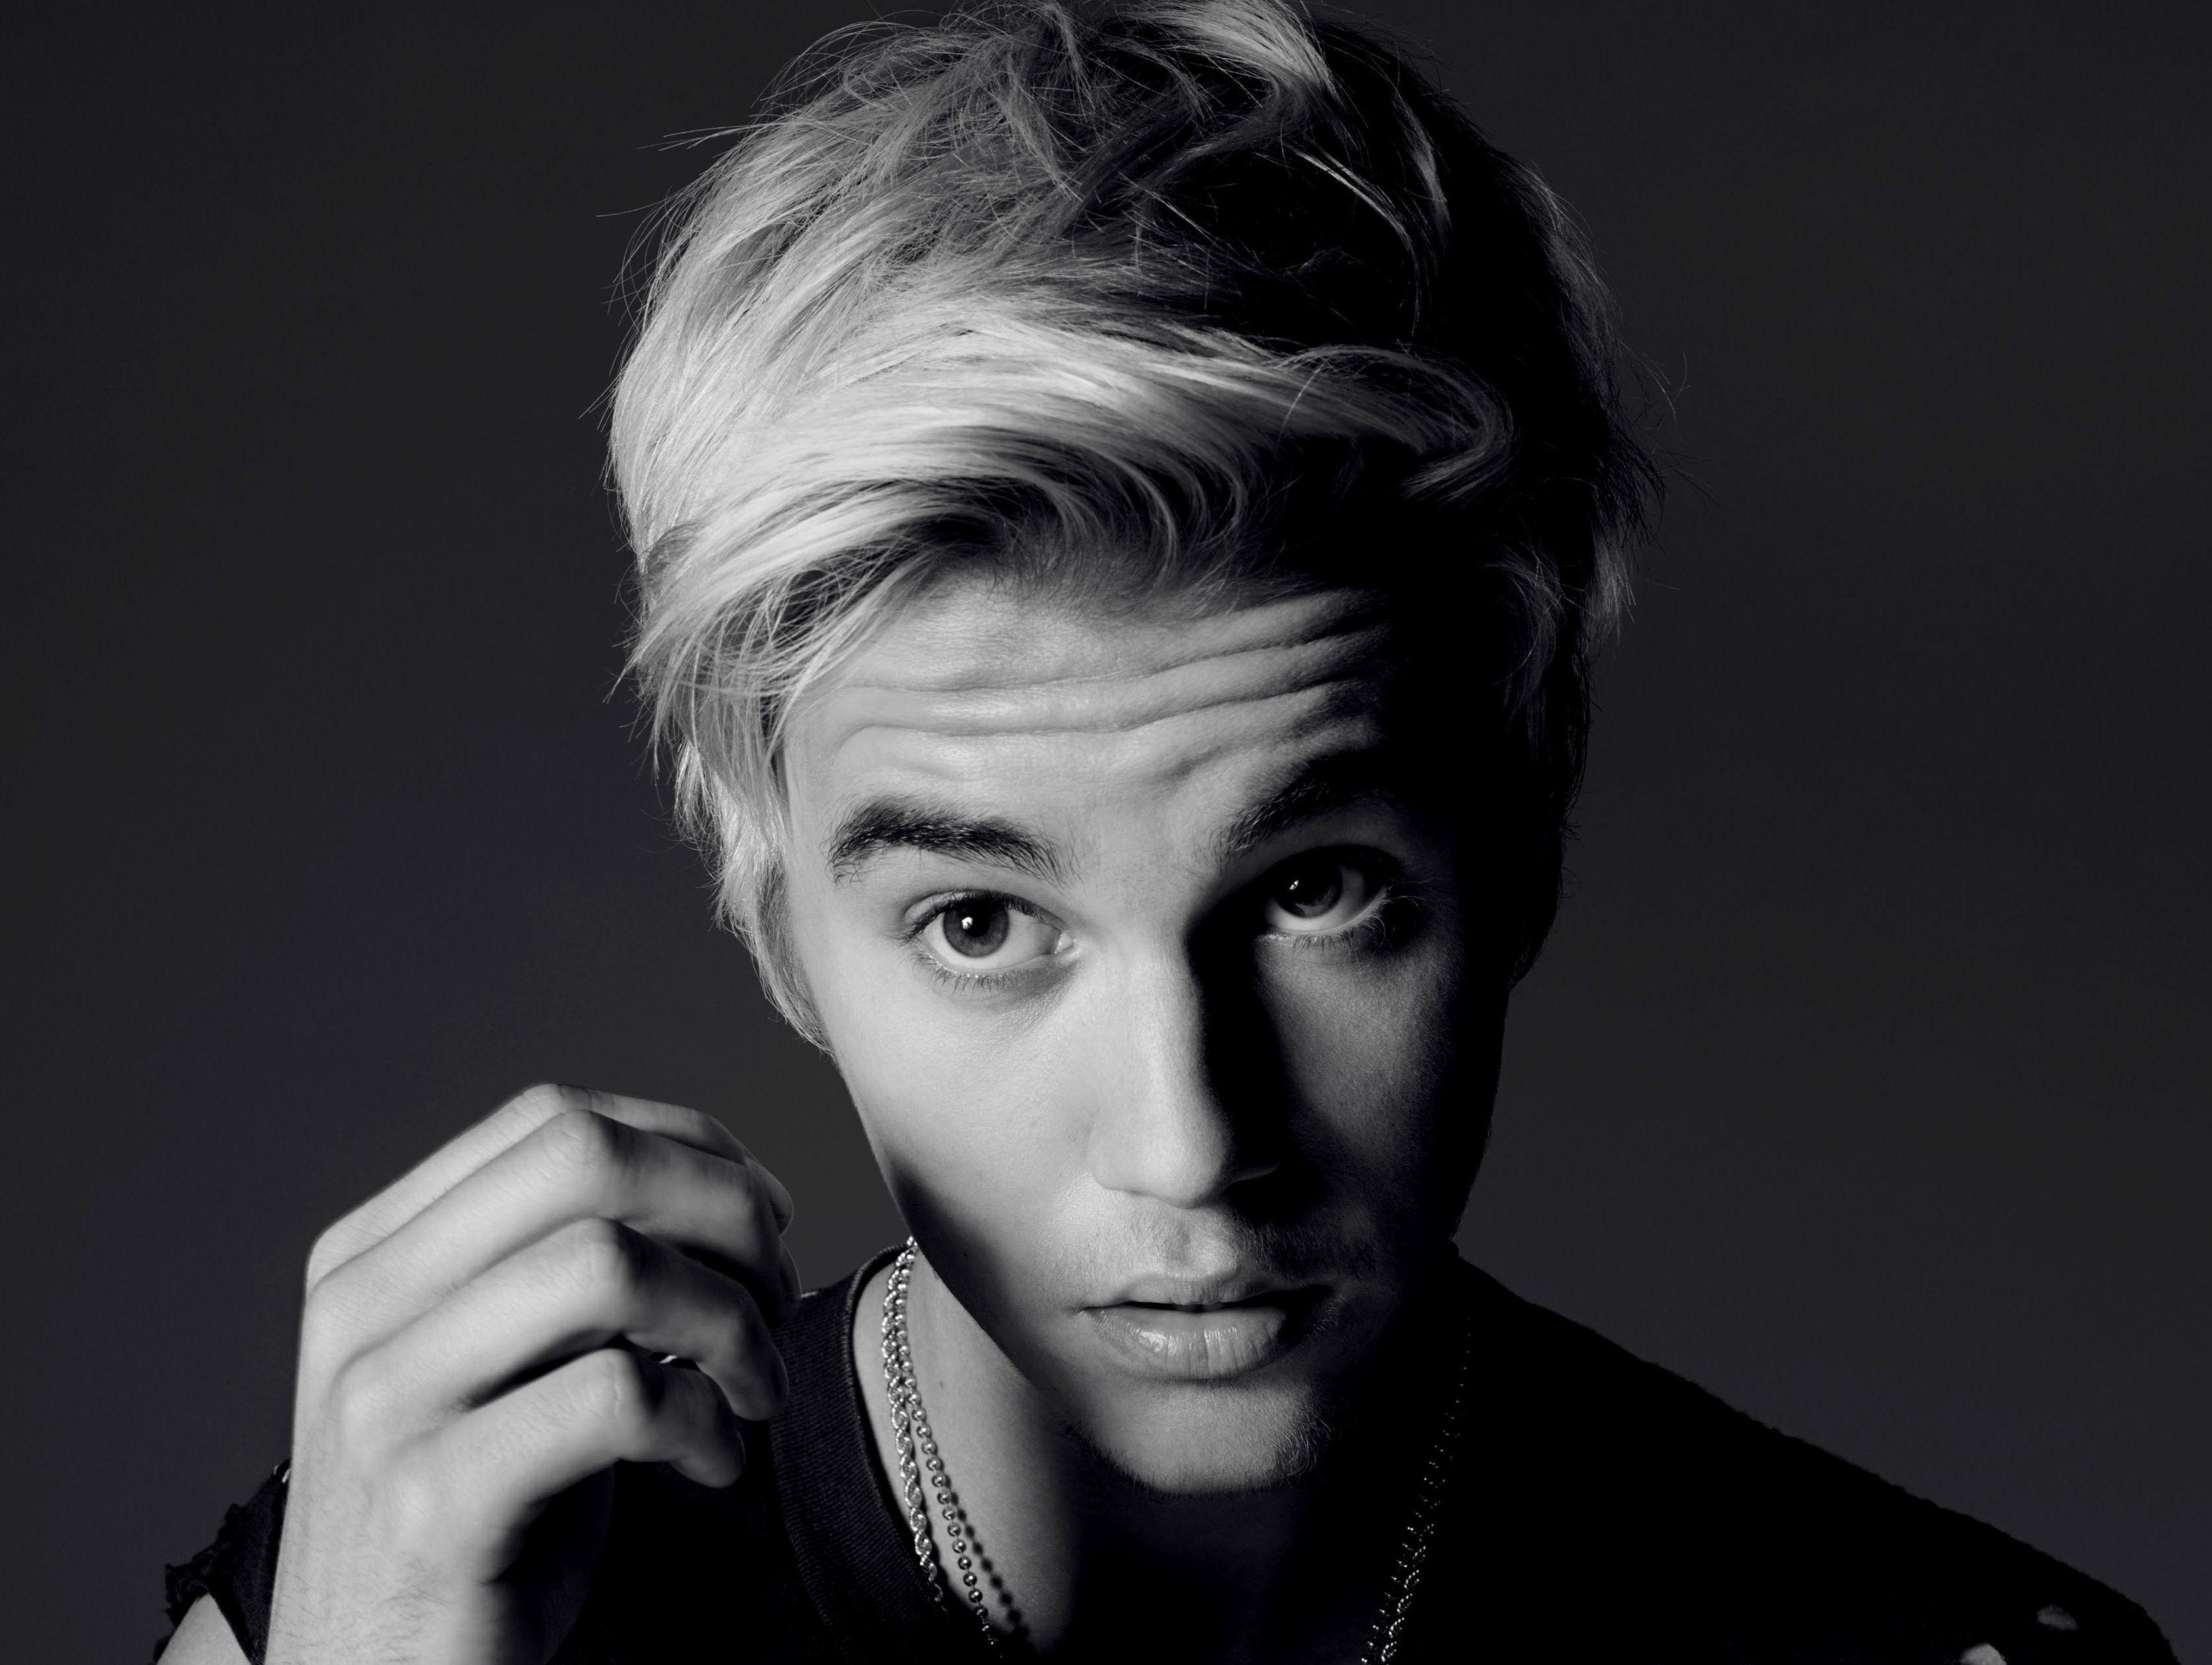 Justin Bieber Steals our Hearts with His New Single 'Sorry